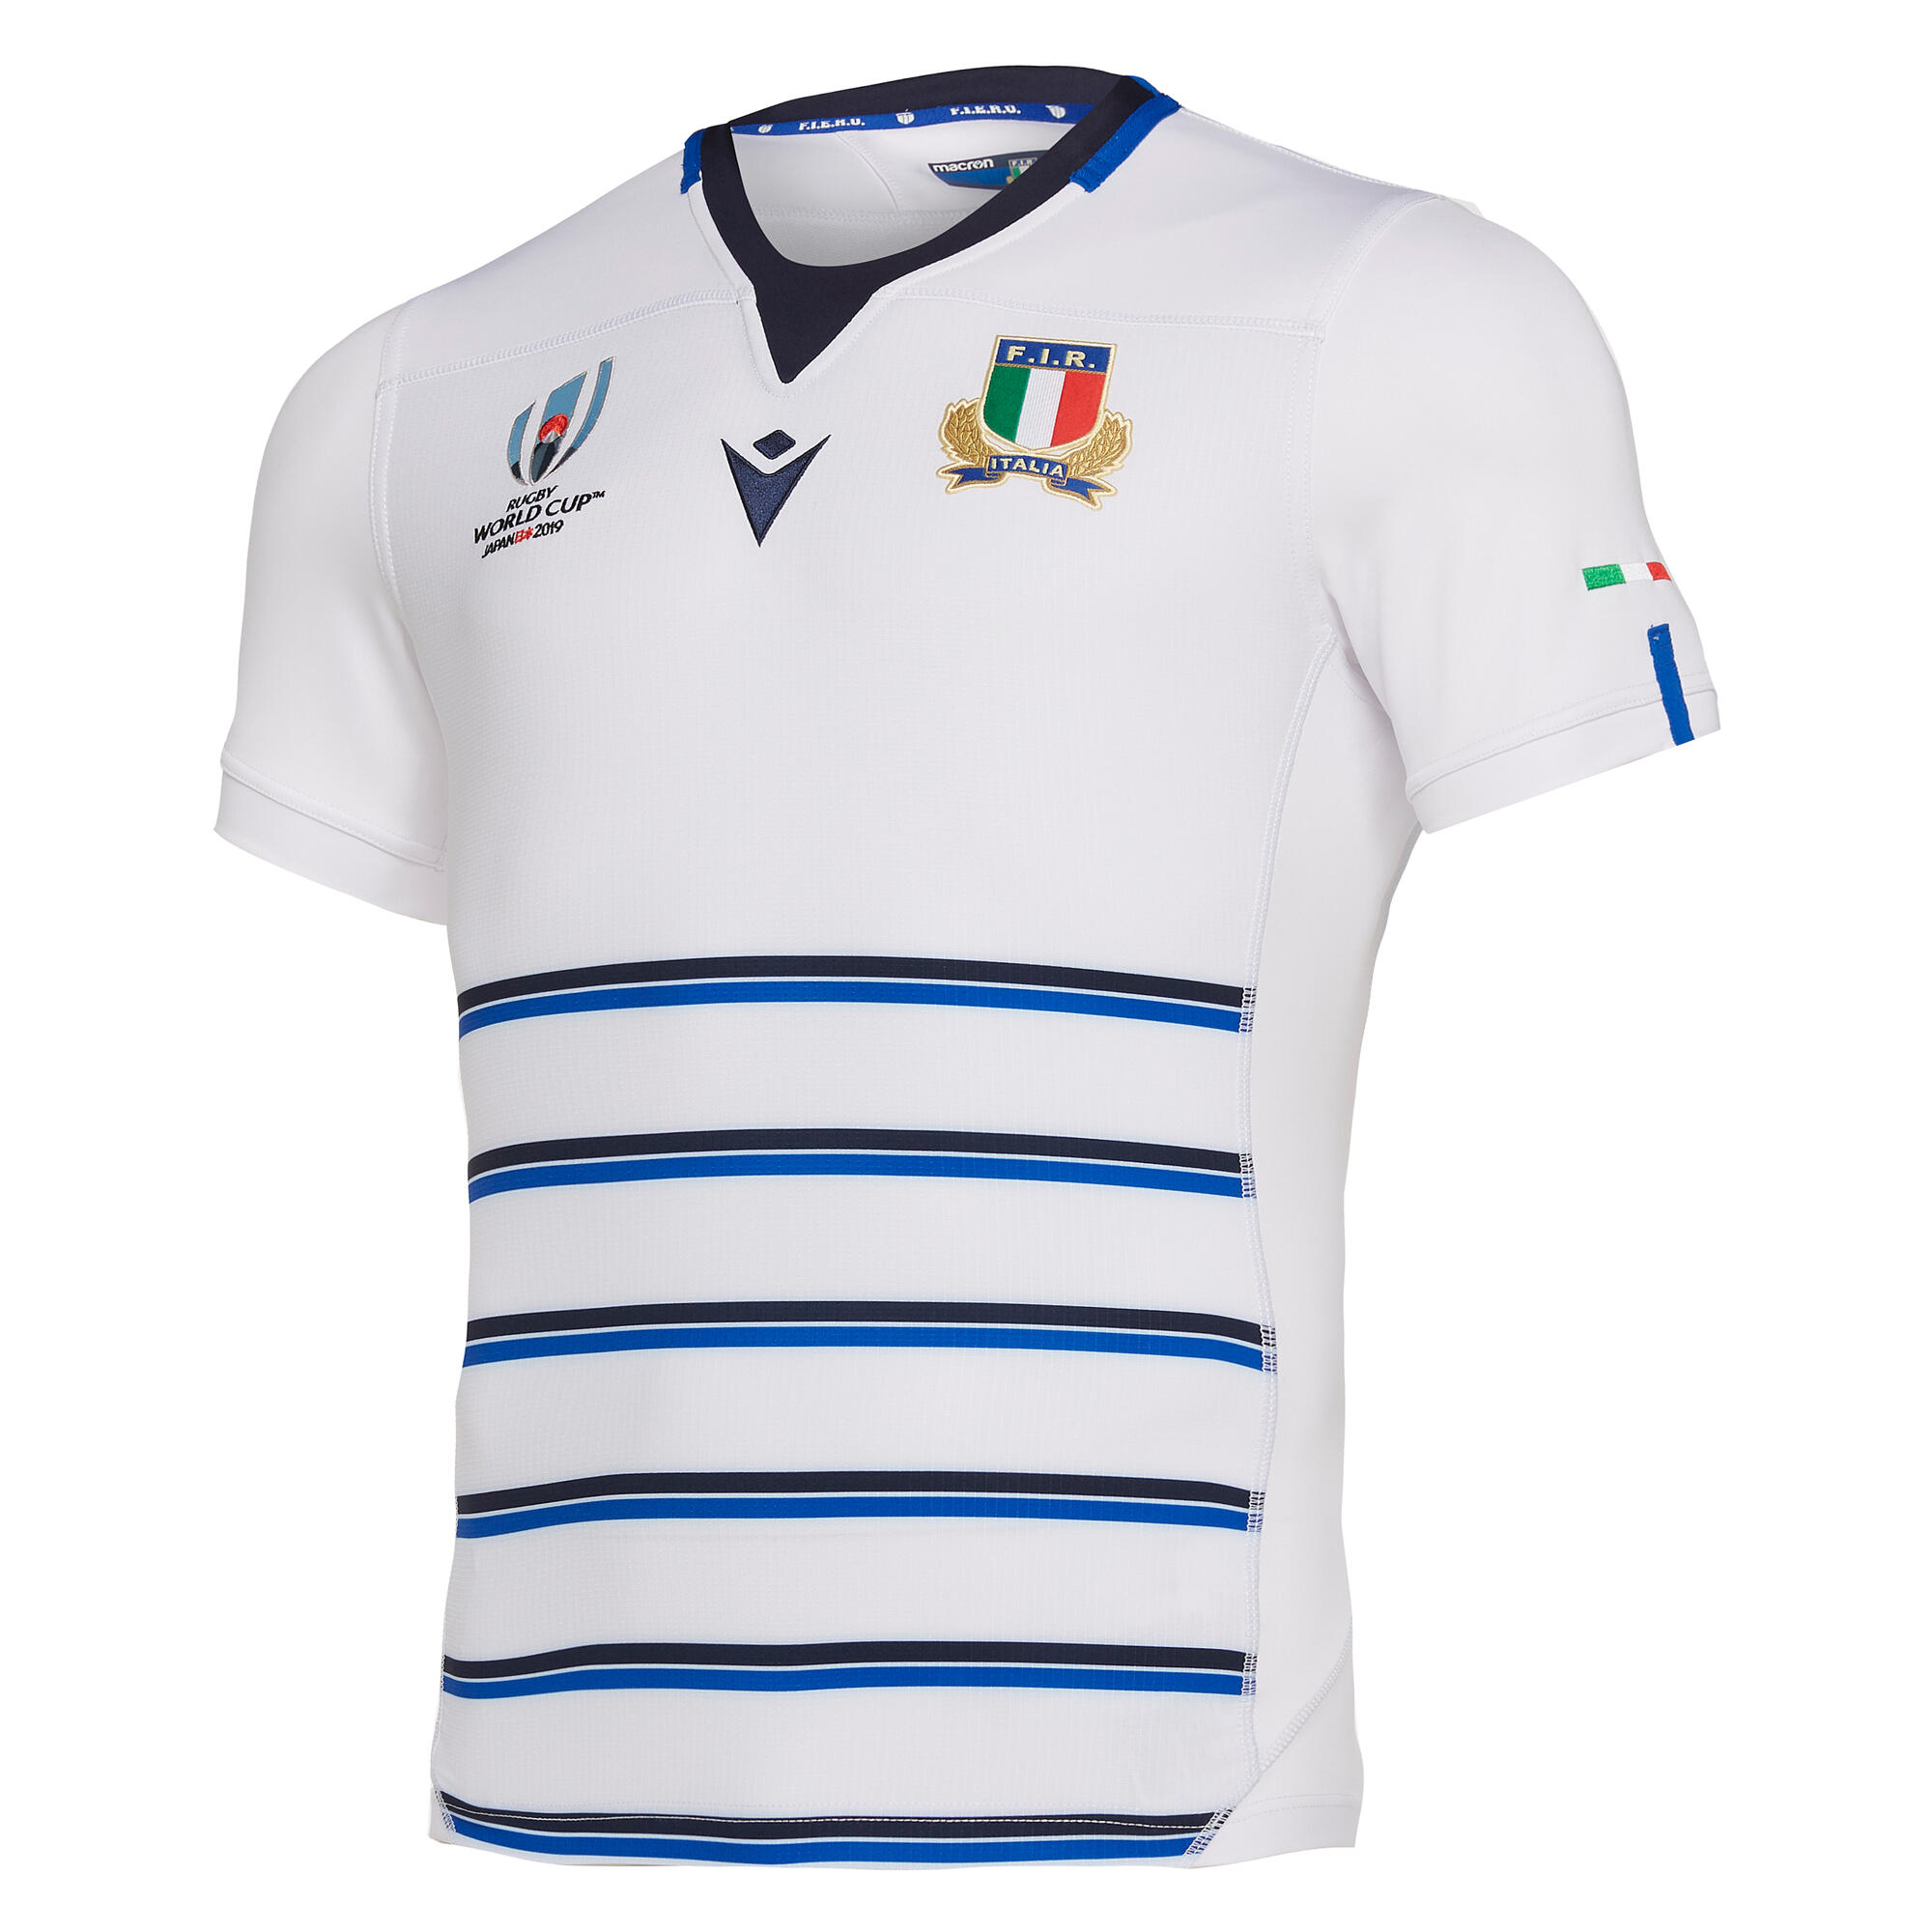 MACRON Macron Italy Mens Rugby World Cup Away Authentic Pro Rugby Shirt 58100164 White